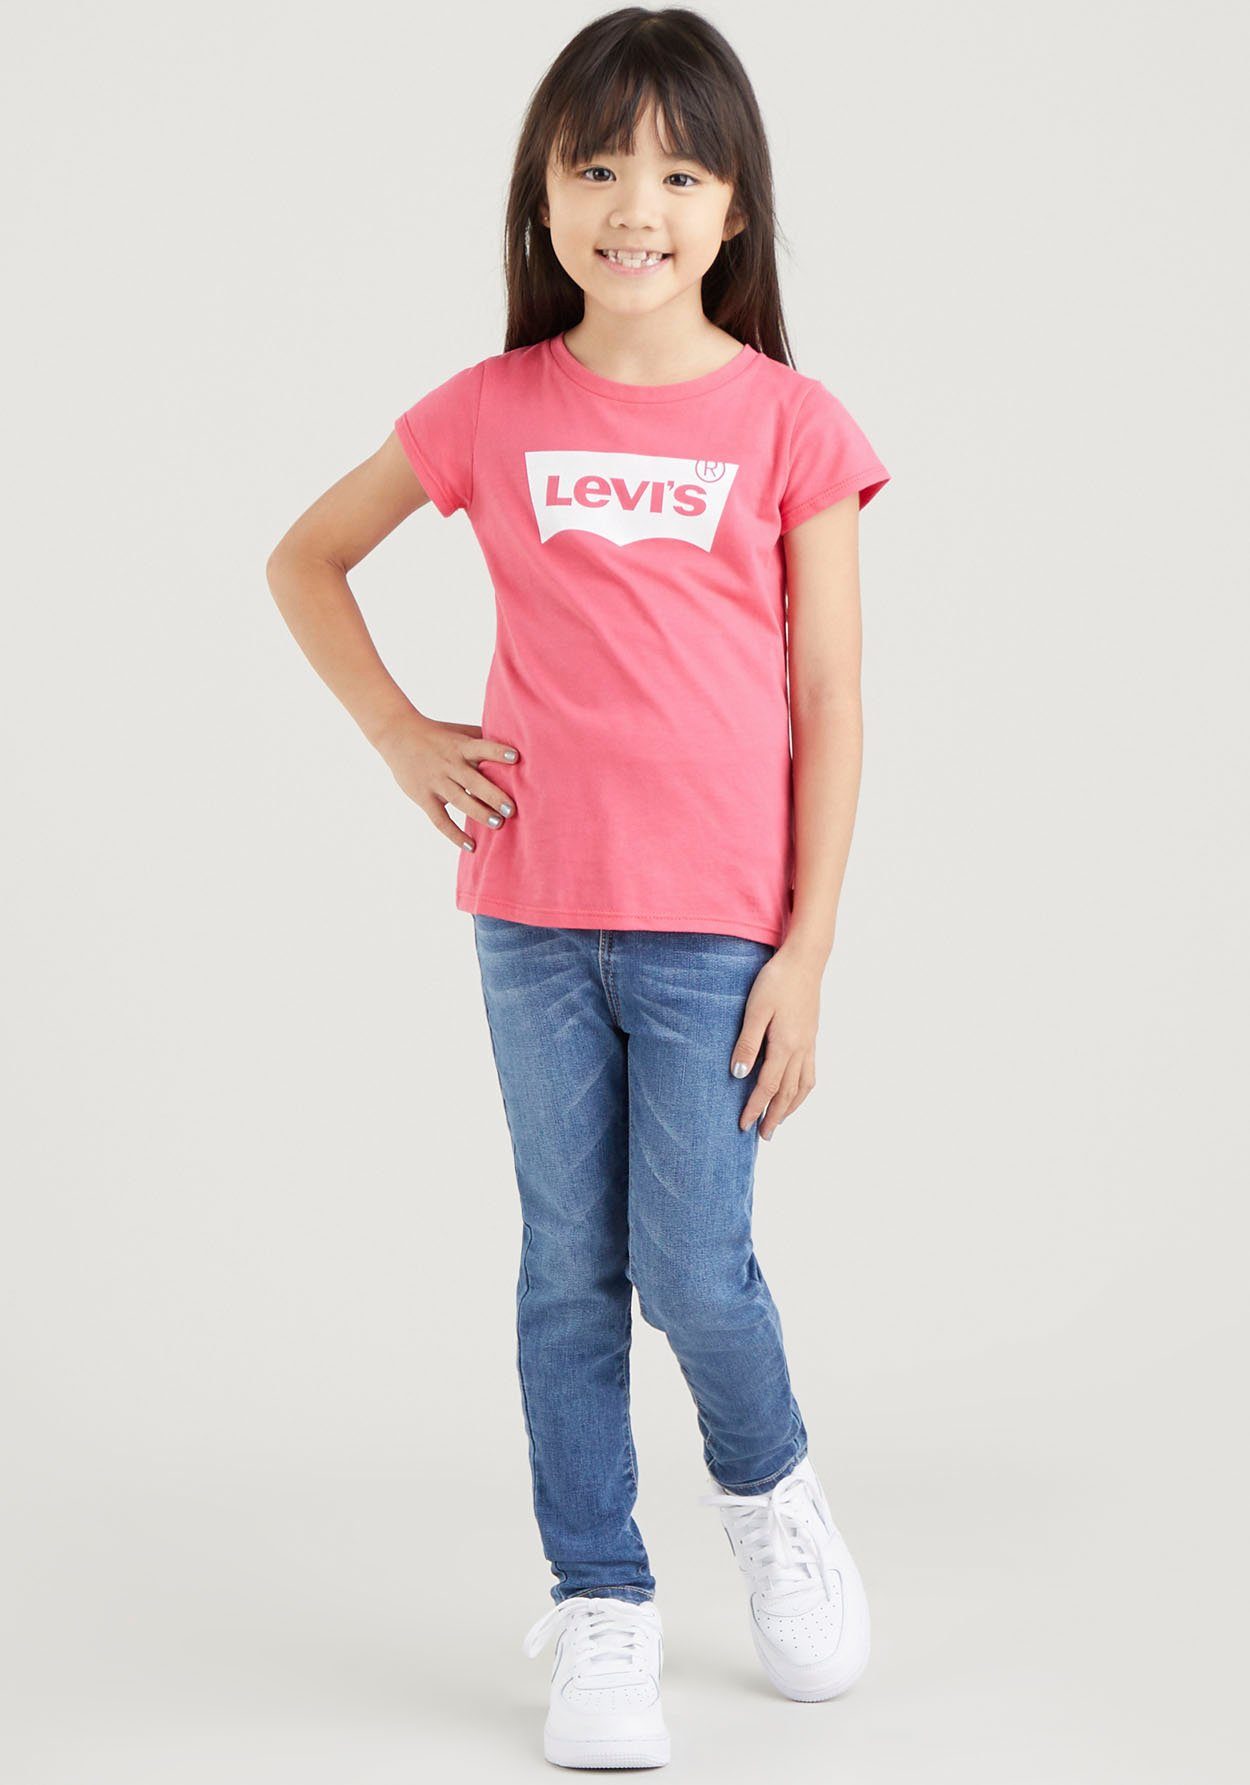 RISE HIGH Levi's® blue used GIRLS mid Kids SUPER SKINNY for 720™ Stretch-Jeans